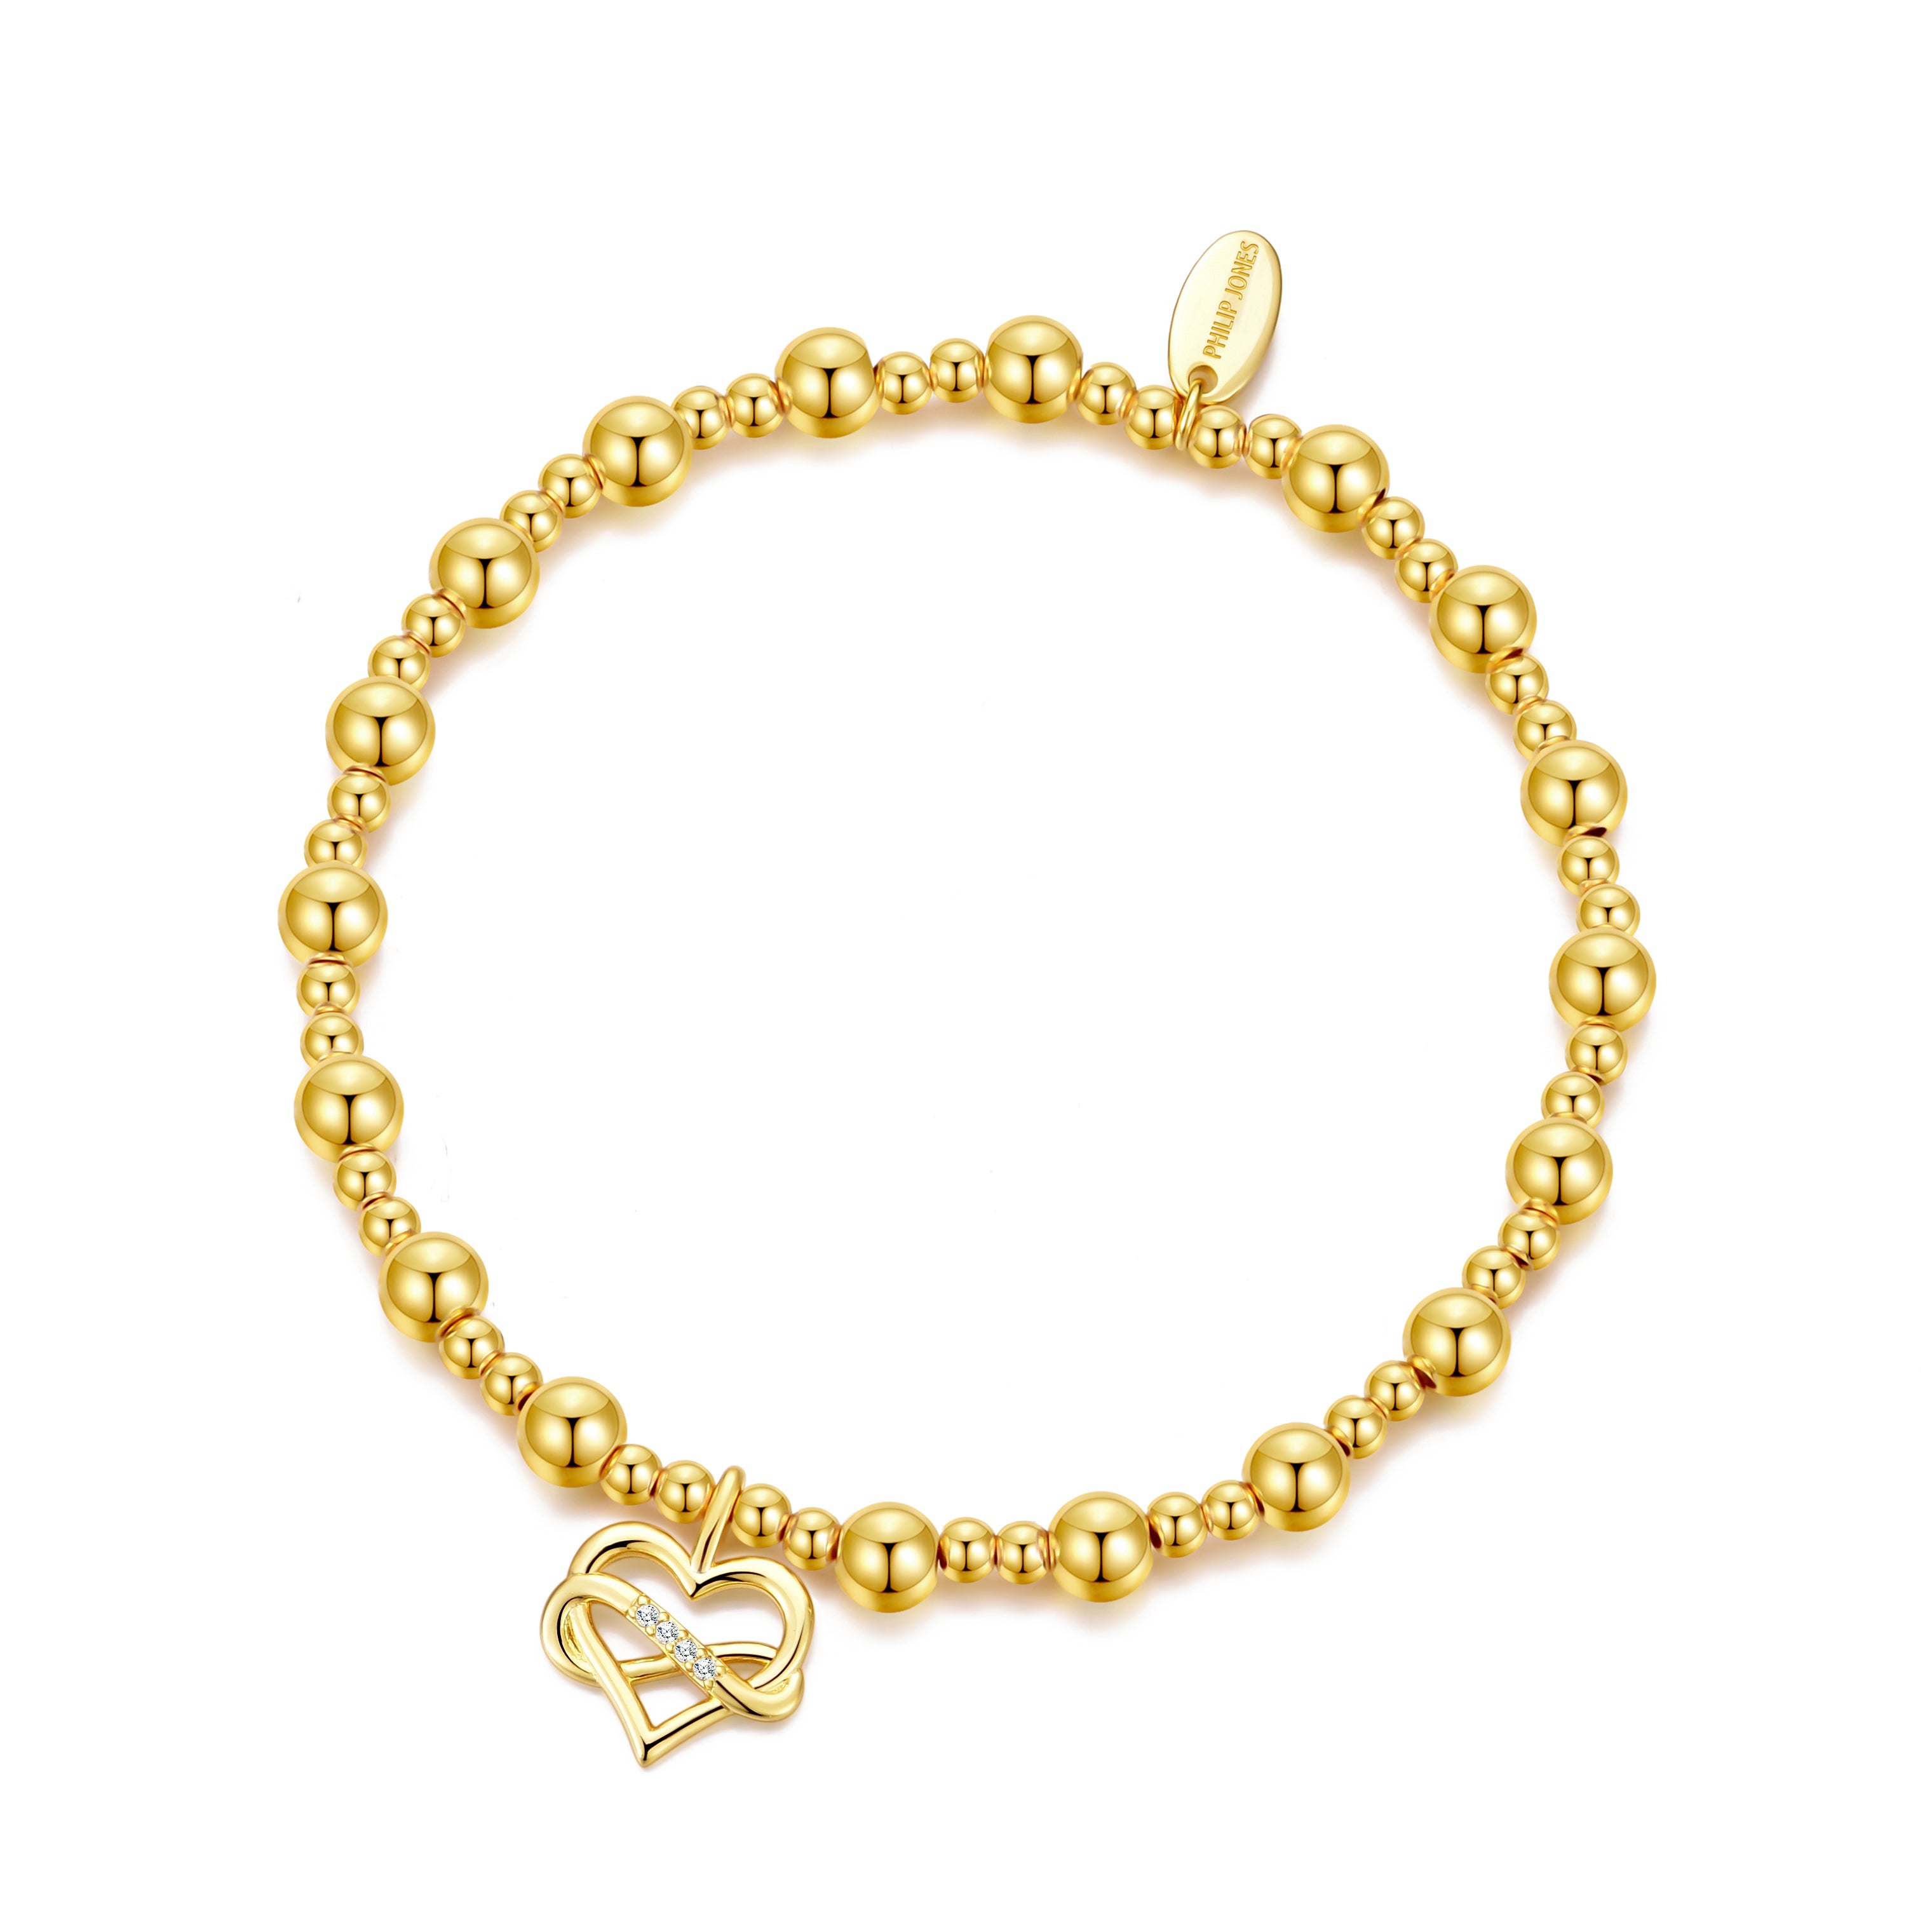 Gold Plated True Friends Quote Stretch Bracelet with Gift Box